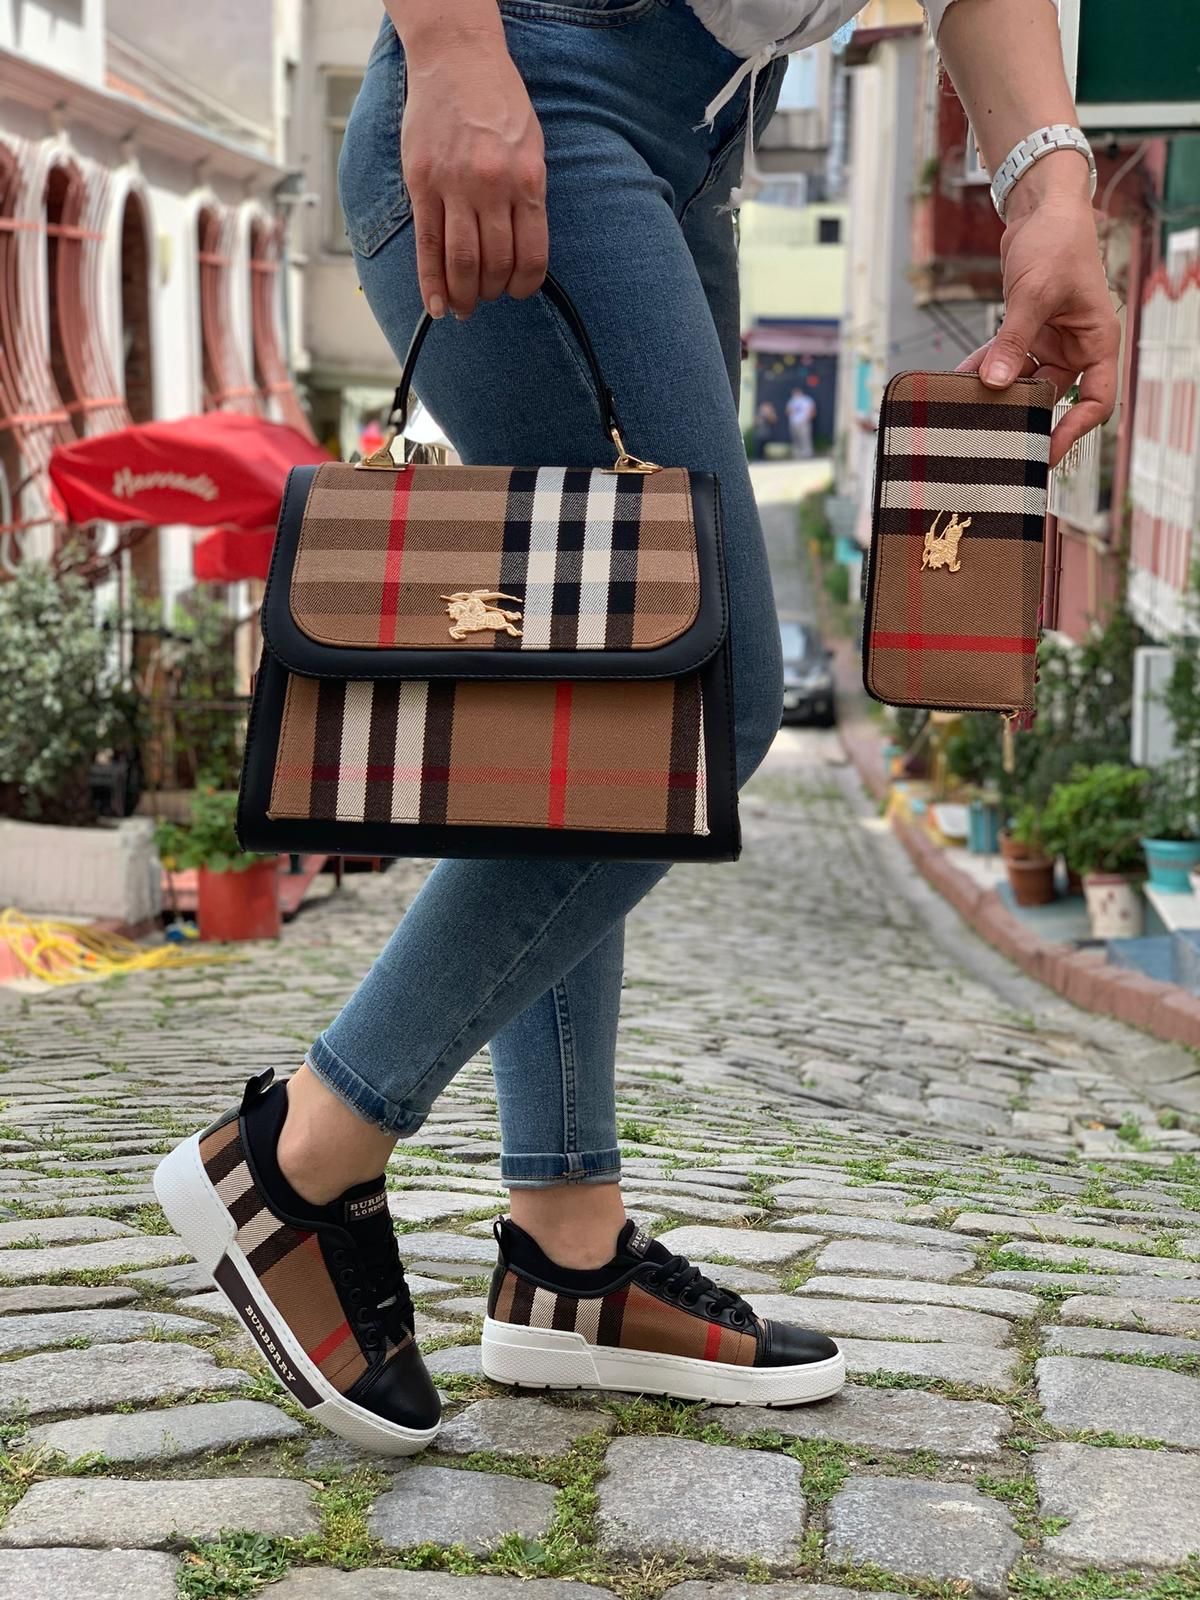 matching-bag-wallet-and-shoes Why I Love Burberry? 4 Must-Have Items For Every Fashionista